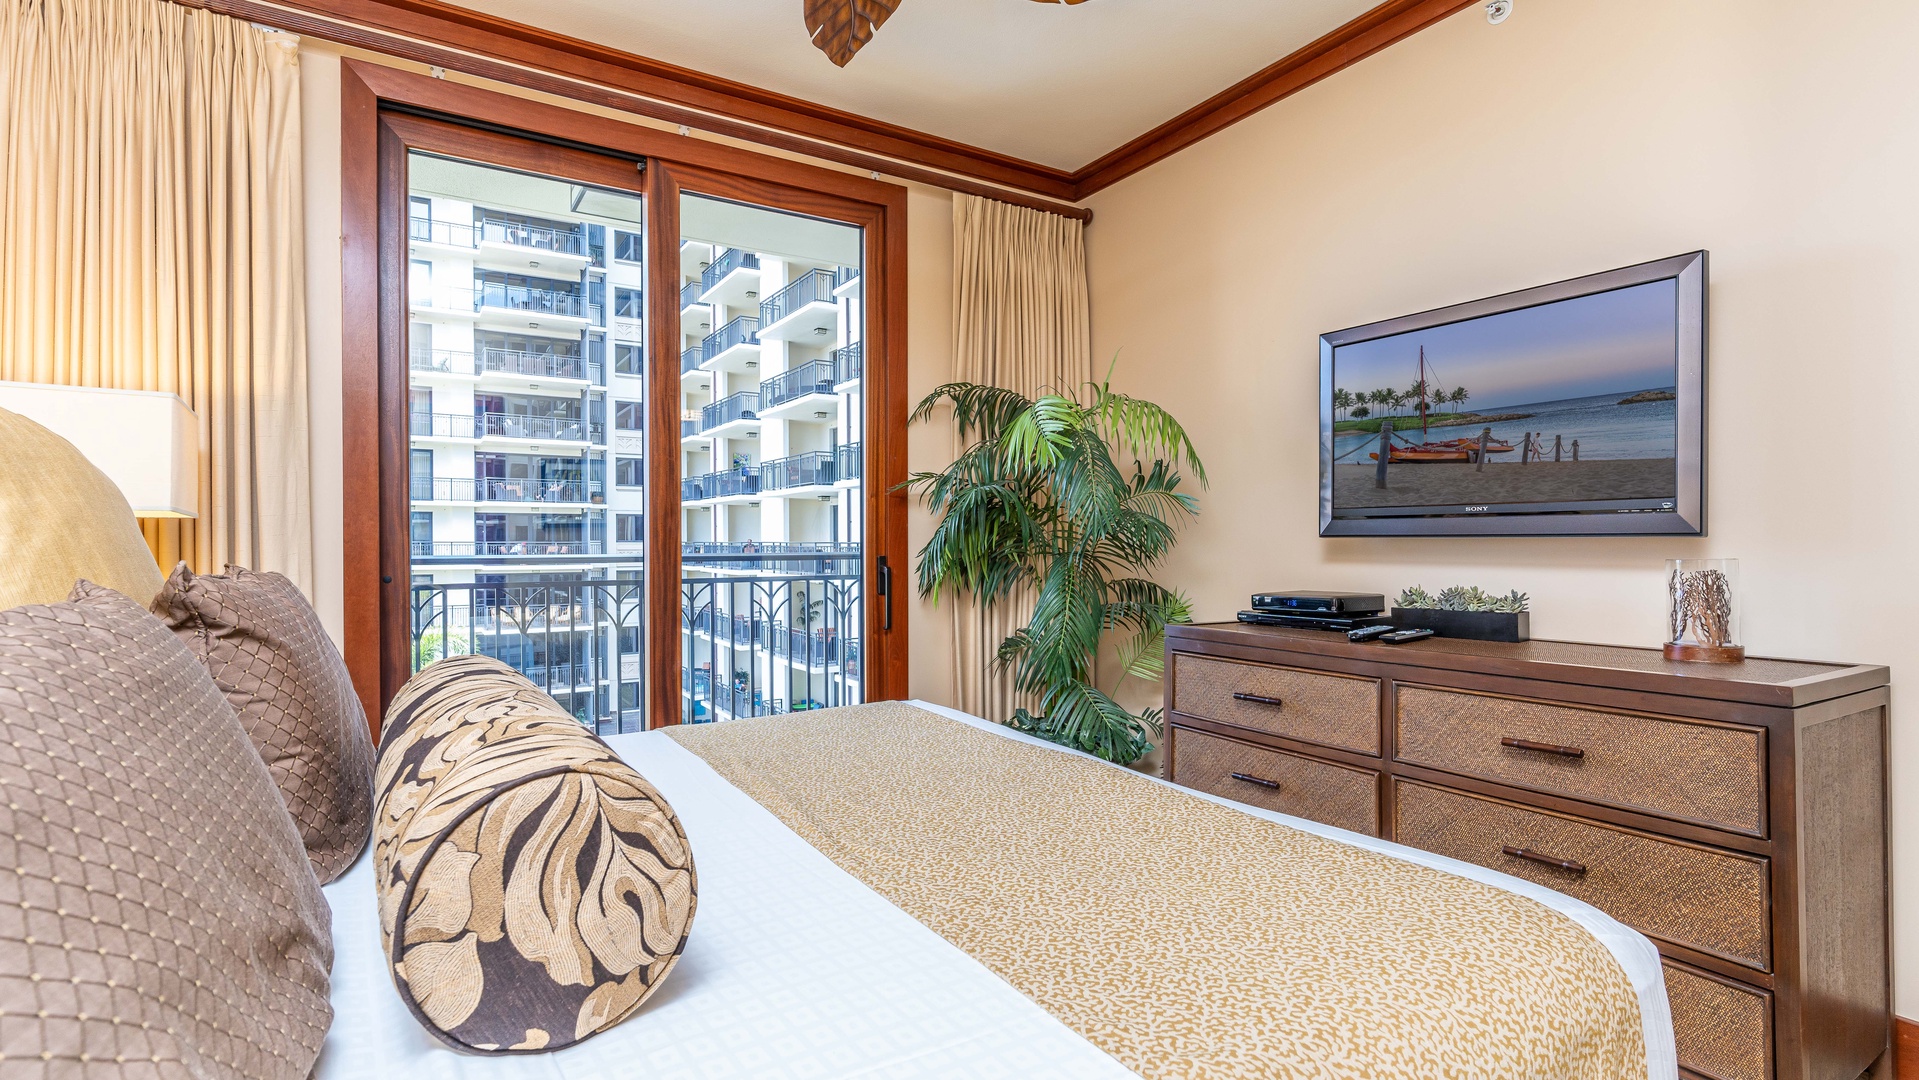 Kapolei Vacation Rentals, Ko Olina Beach Villas O521 - The primary bedroom also offers extra storage and TV.